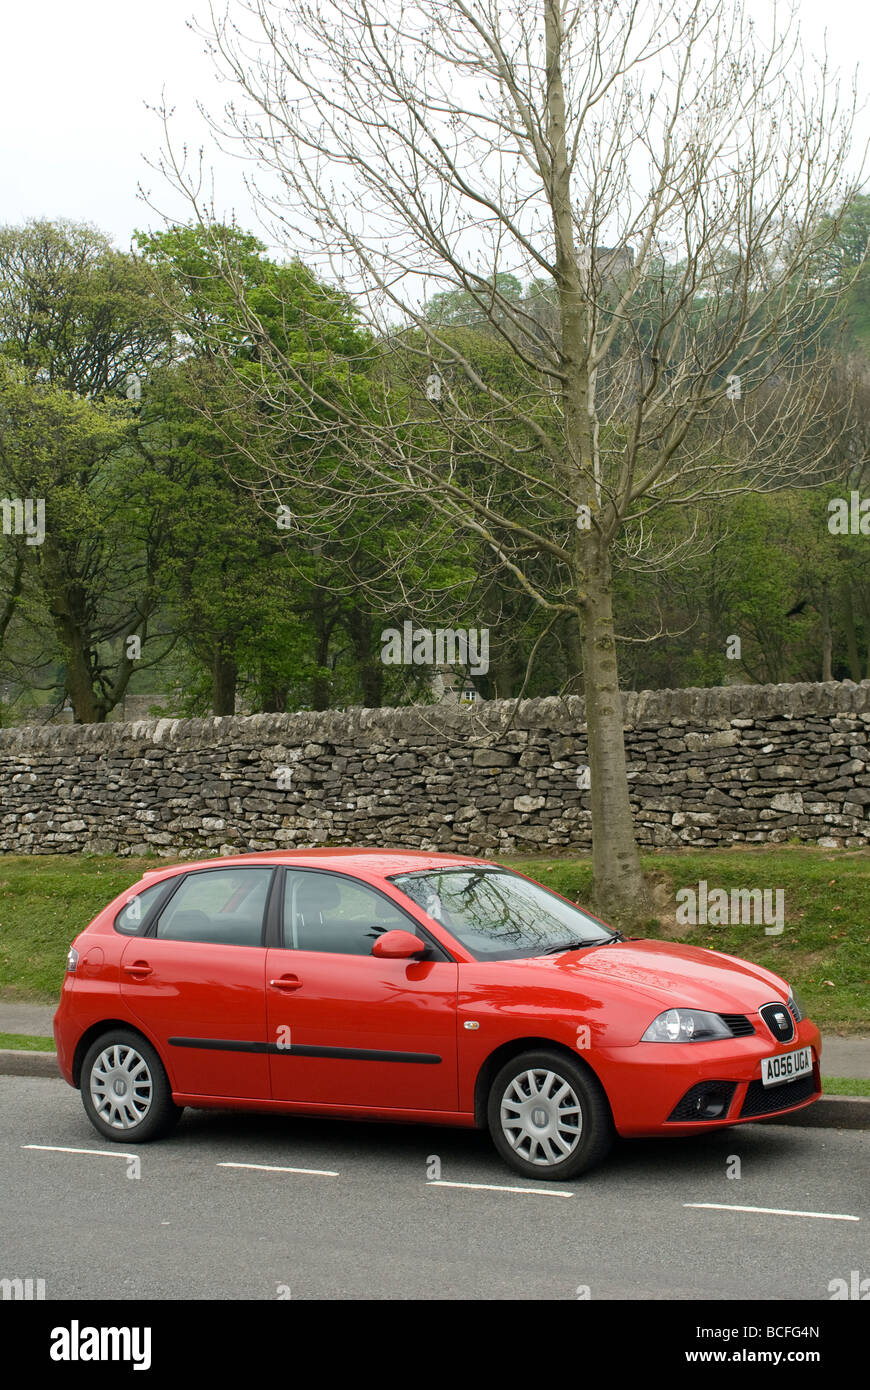 Red seat ibiza car parked at the side of the road in rural Derbyshire England Stock Photo